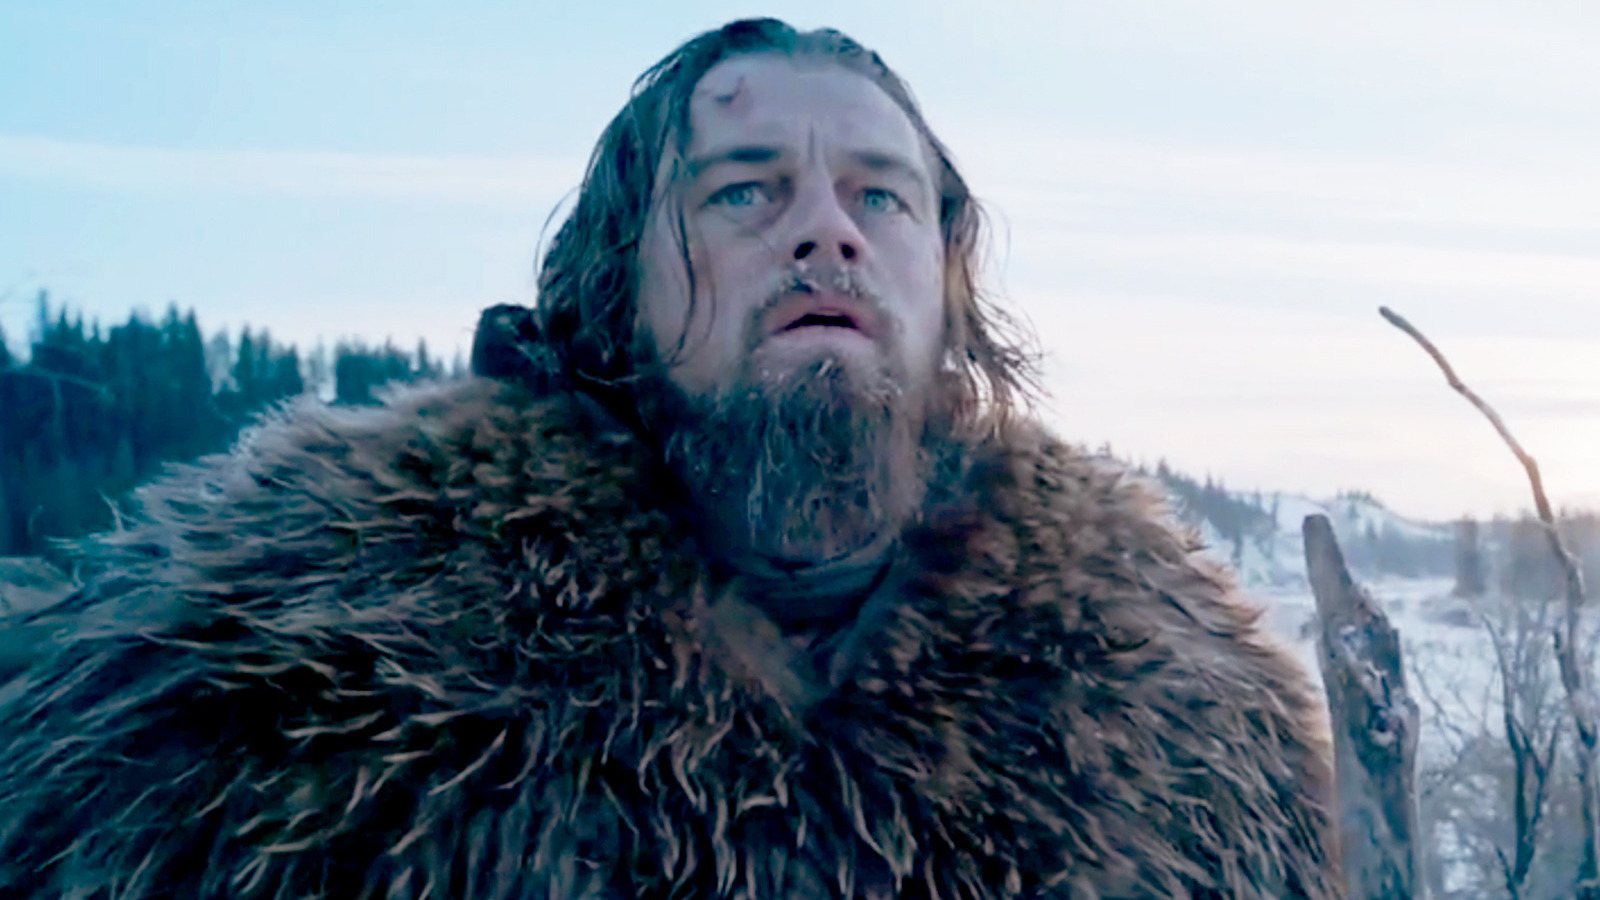 Leonardo DiCaprio in character, wearing a fur coat, looks determined in a snowy landscape